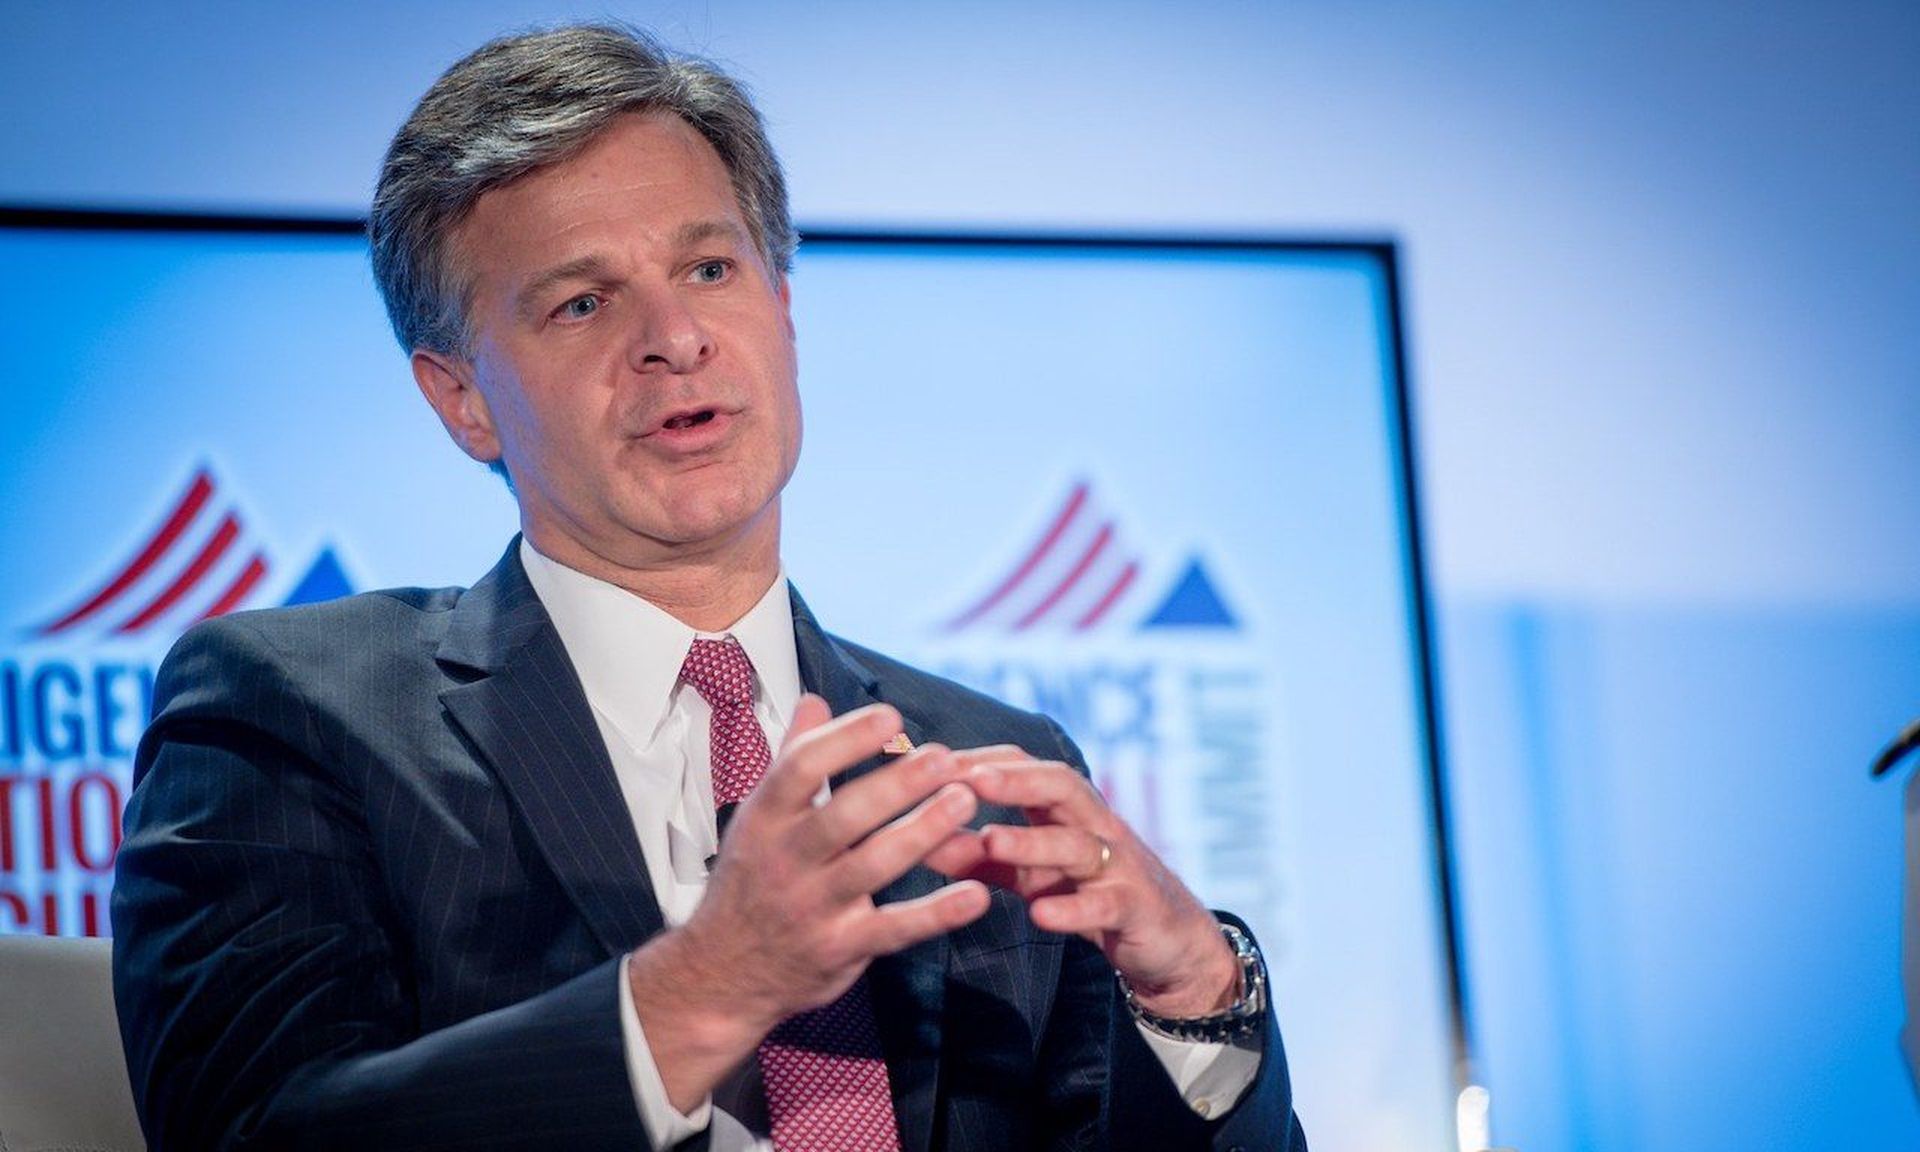 FBI Director Christopher Wray speaks to a group in Washington, D.C. The FBI recently reported that total U.S. losses from cybercrime topped $4.1 billion in 2020. Today’s columnist, Glenn Mulvaney of Clumio, says while ransomware has become a hot-button issue, companies also need to focus on viruses, DDoS attacks, cryptojacking, and securing the clo...